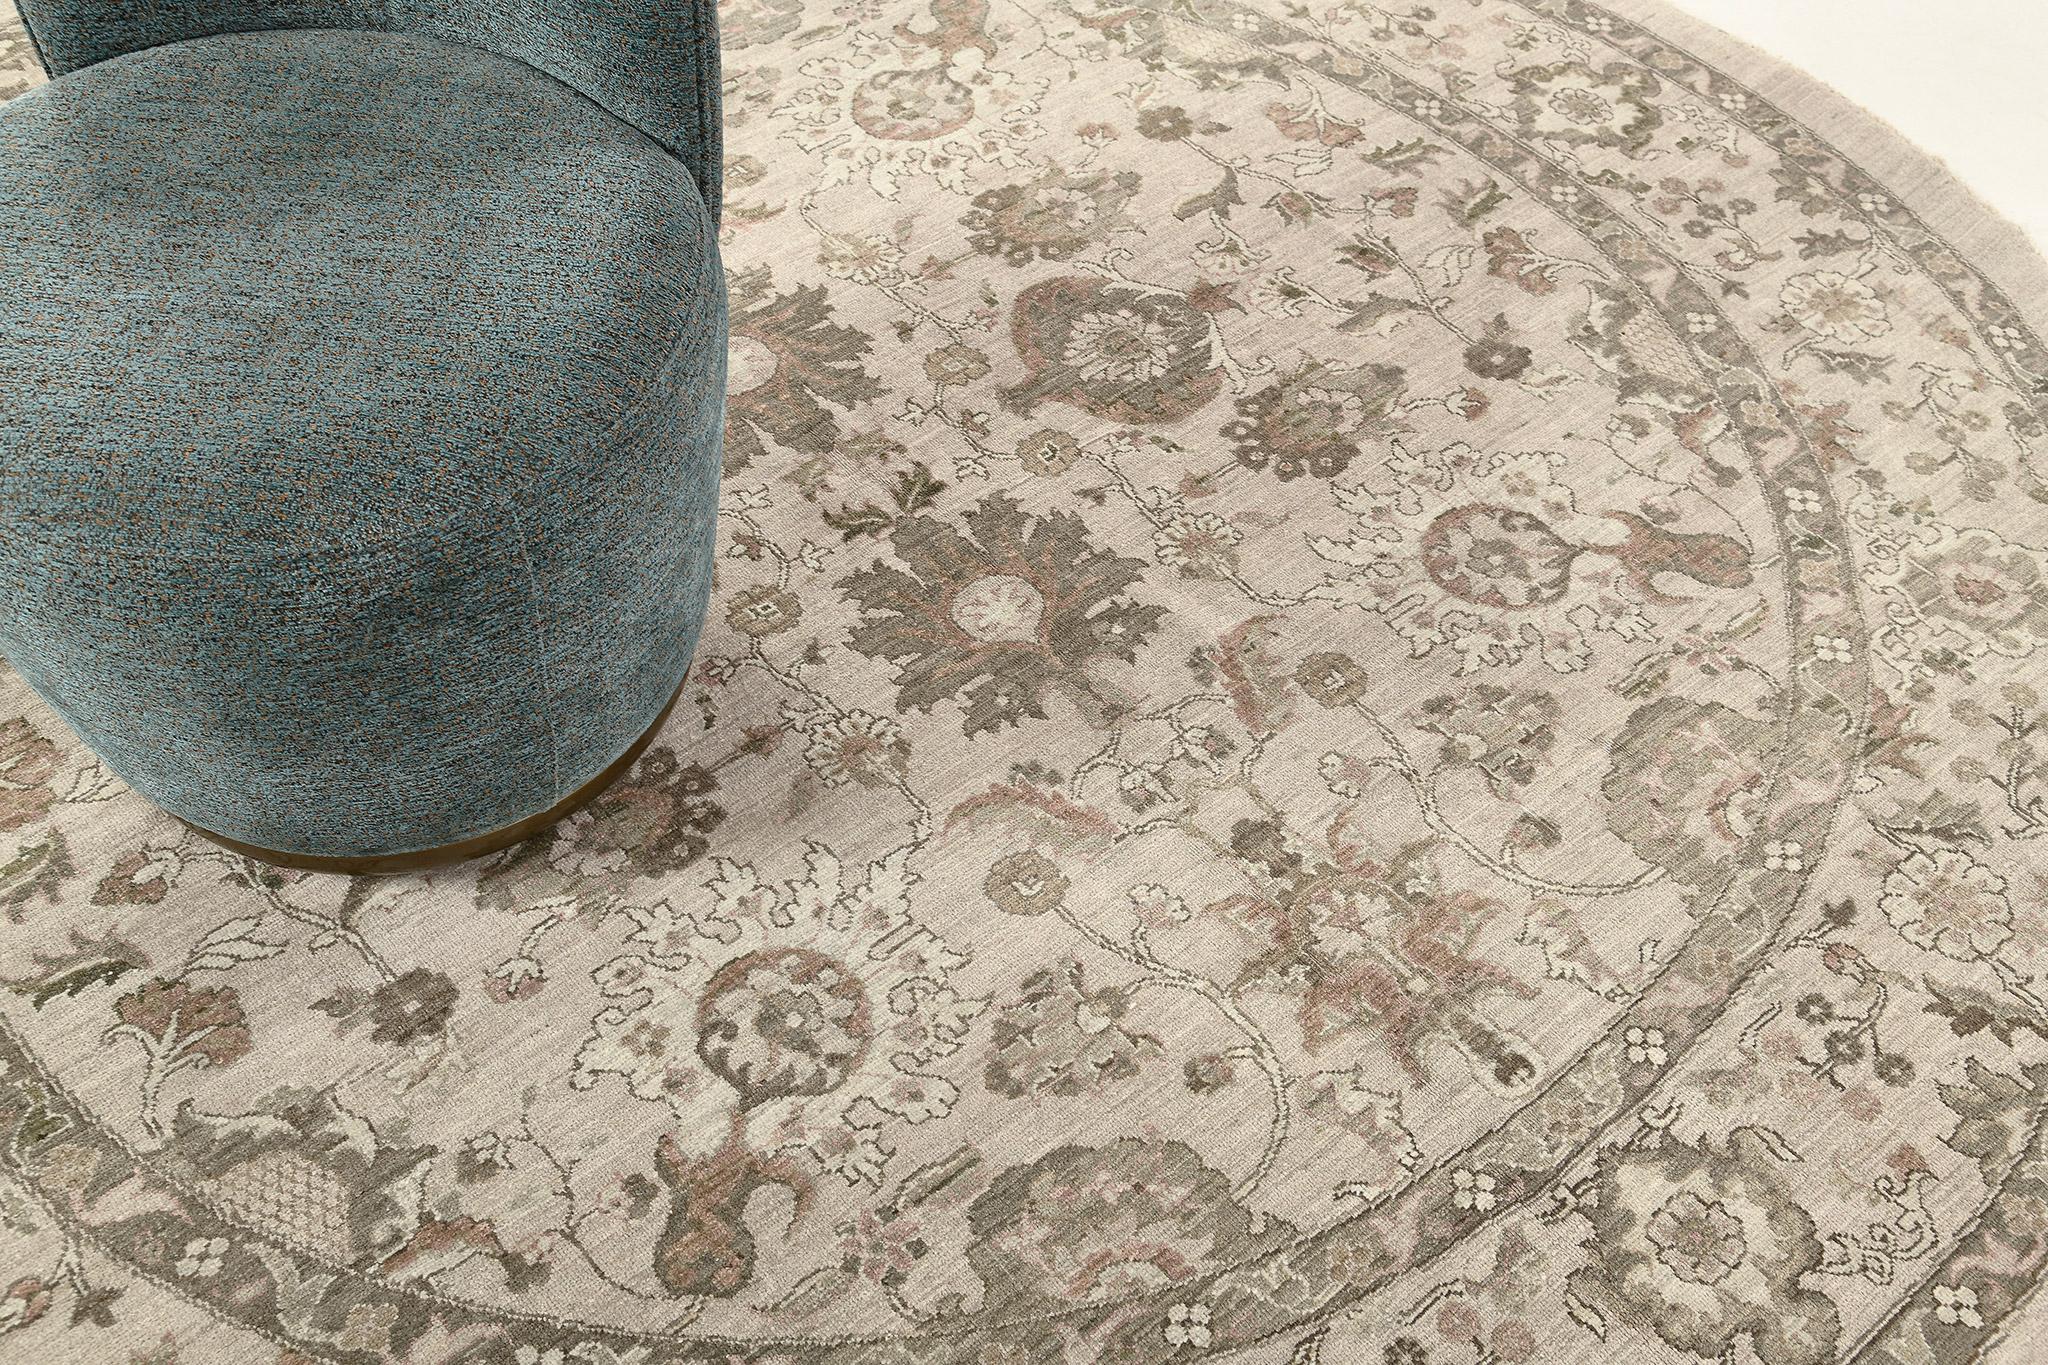 Series of mirrored florid ornaments and vines are reflected through charcoal embellishments with fall-themed accents to the grayscale field. The borders are beautifully hand-woven that created from a vegetable dye to form an elegant Sultanabad Round